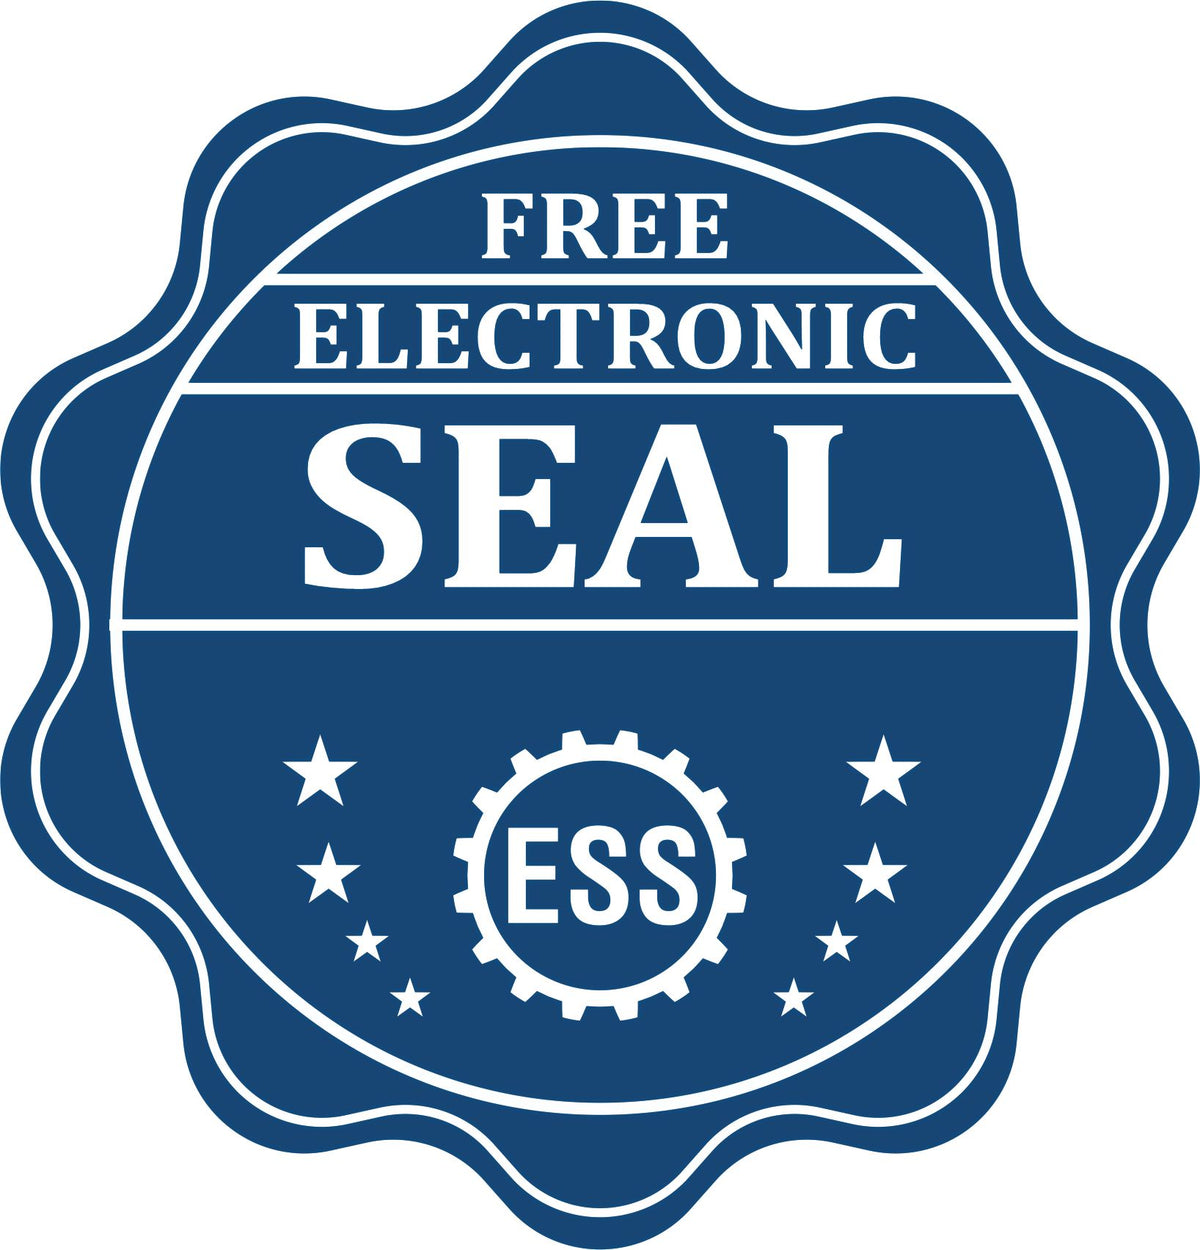 A badge showing a free electronic seal for the Heavy Duty Cast Iron Wyoming Engineer Seal Embosser with stars and the ESS gear on the emblem.